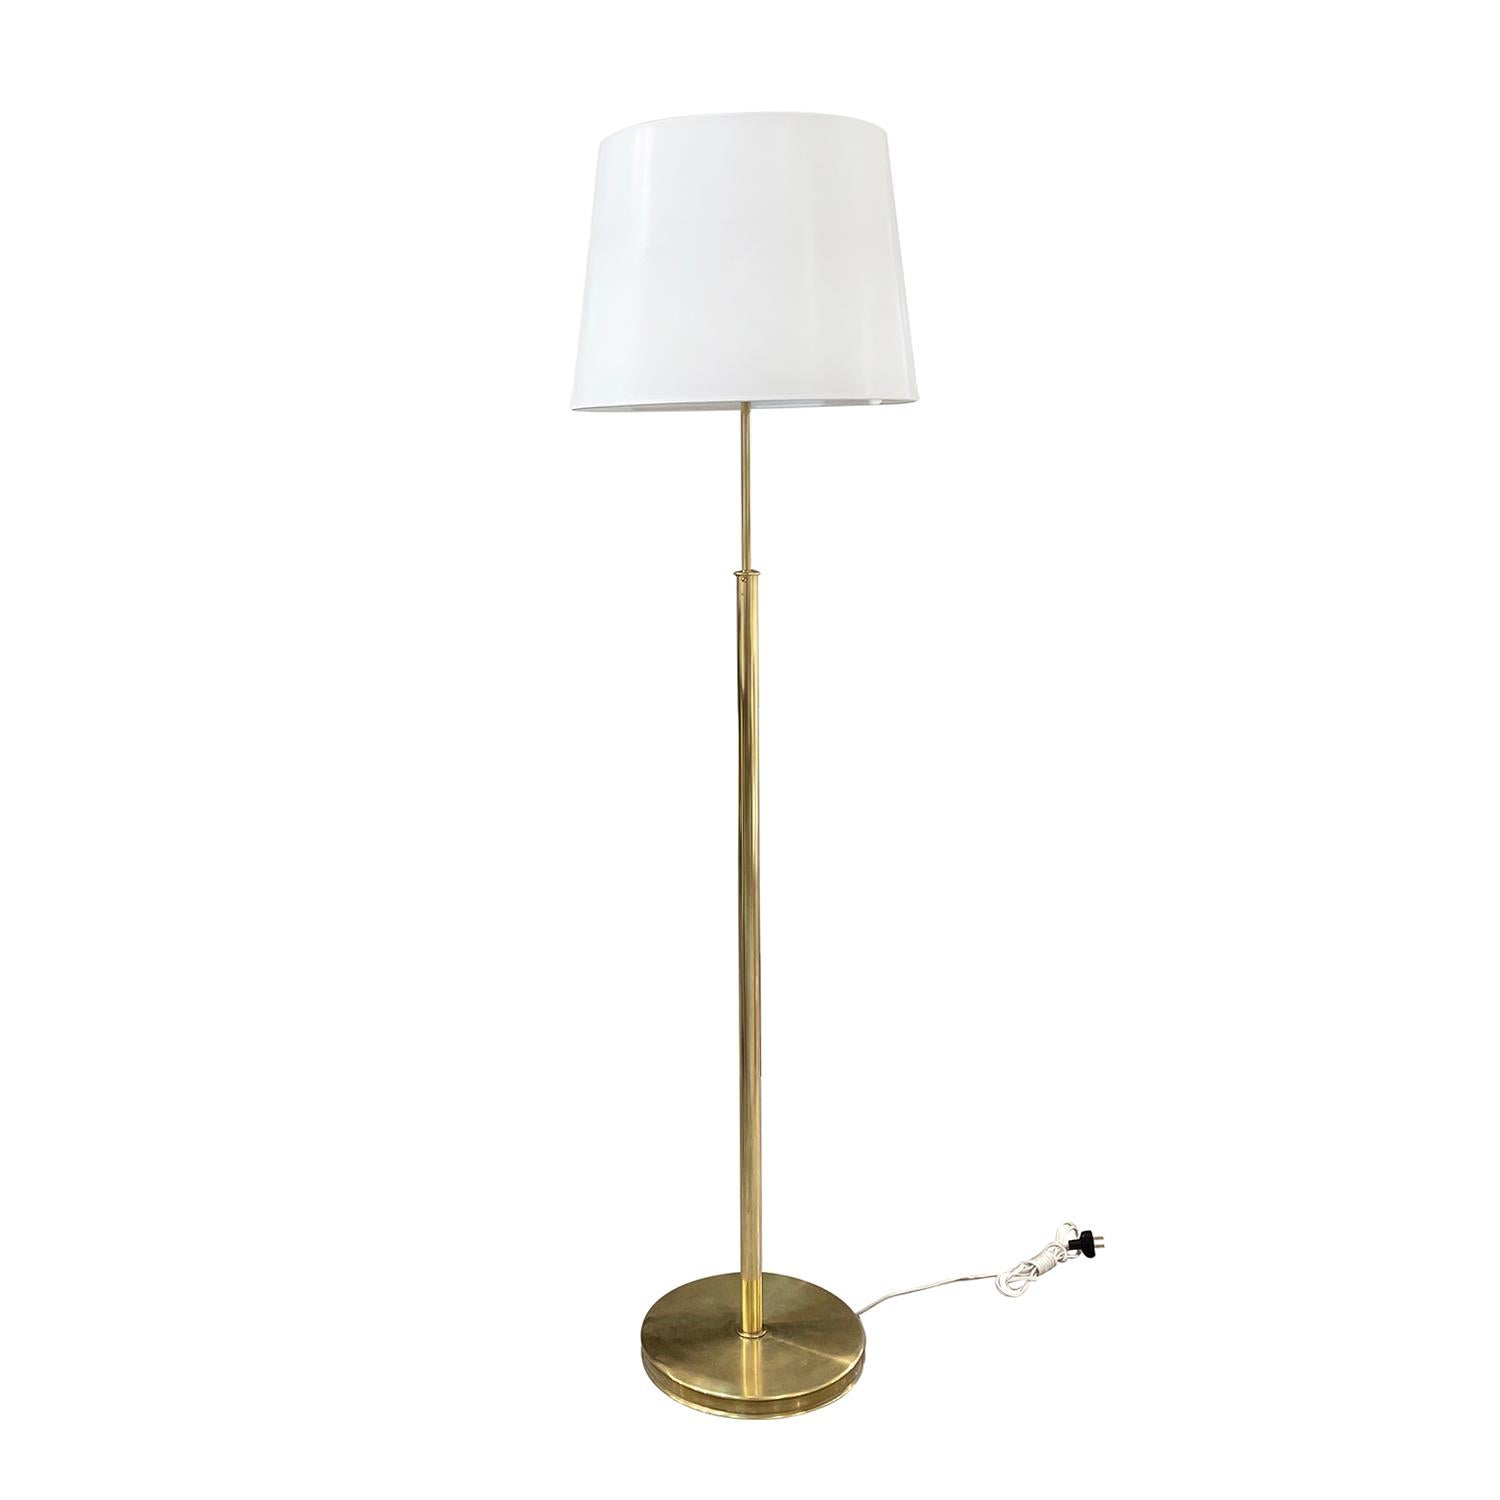 A vintage Mid-Century Modern Swedish reading floor lamp with a new withe round shade made of hand crafted polished brass, composed with its original light switches, designed by Josef Frank and produced by Svenskt Tenn in good condition. The